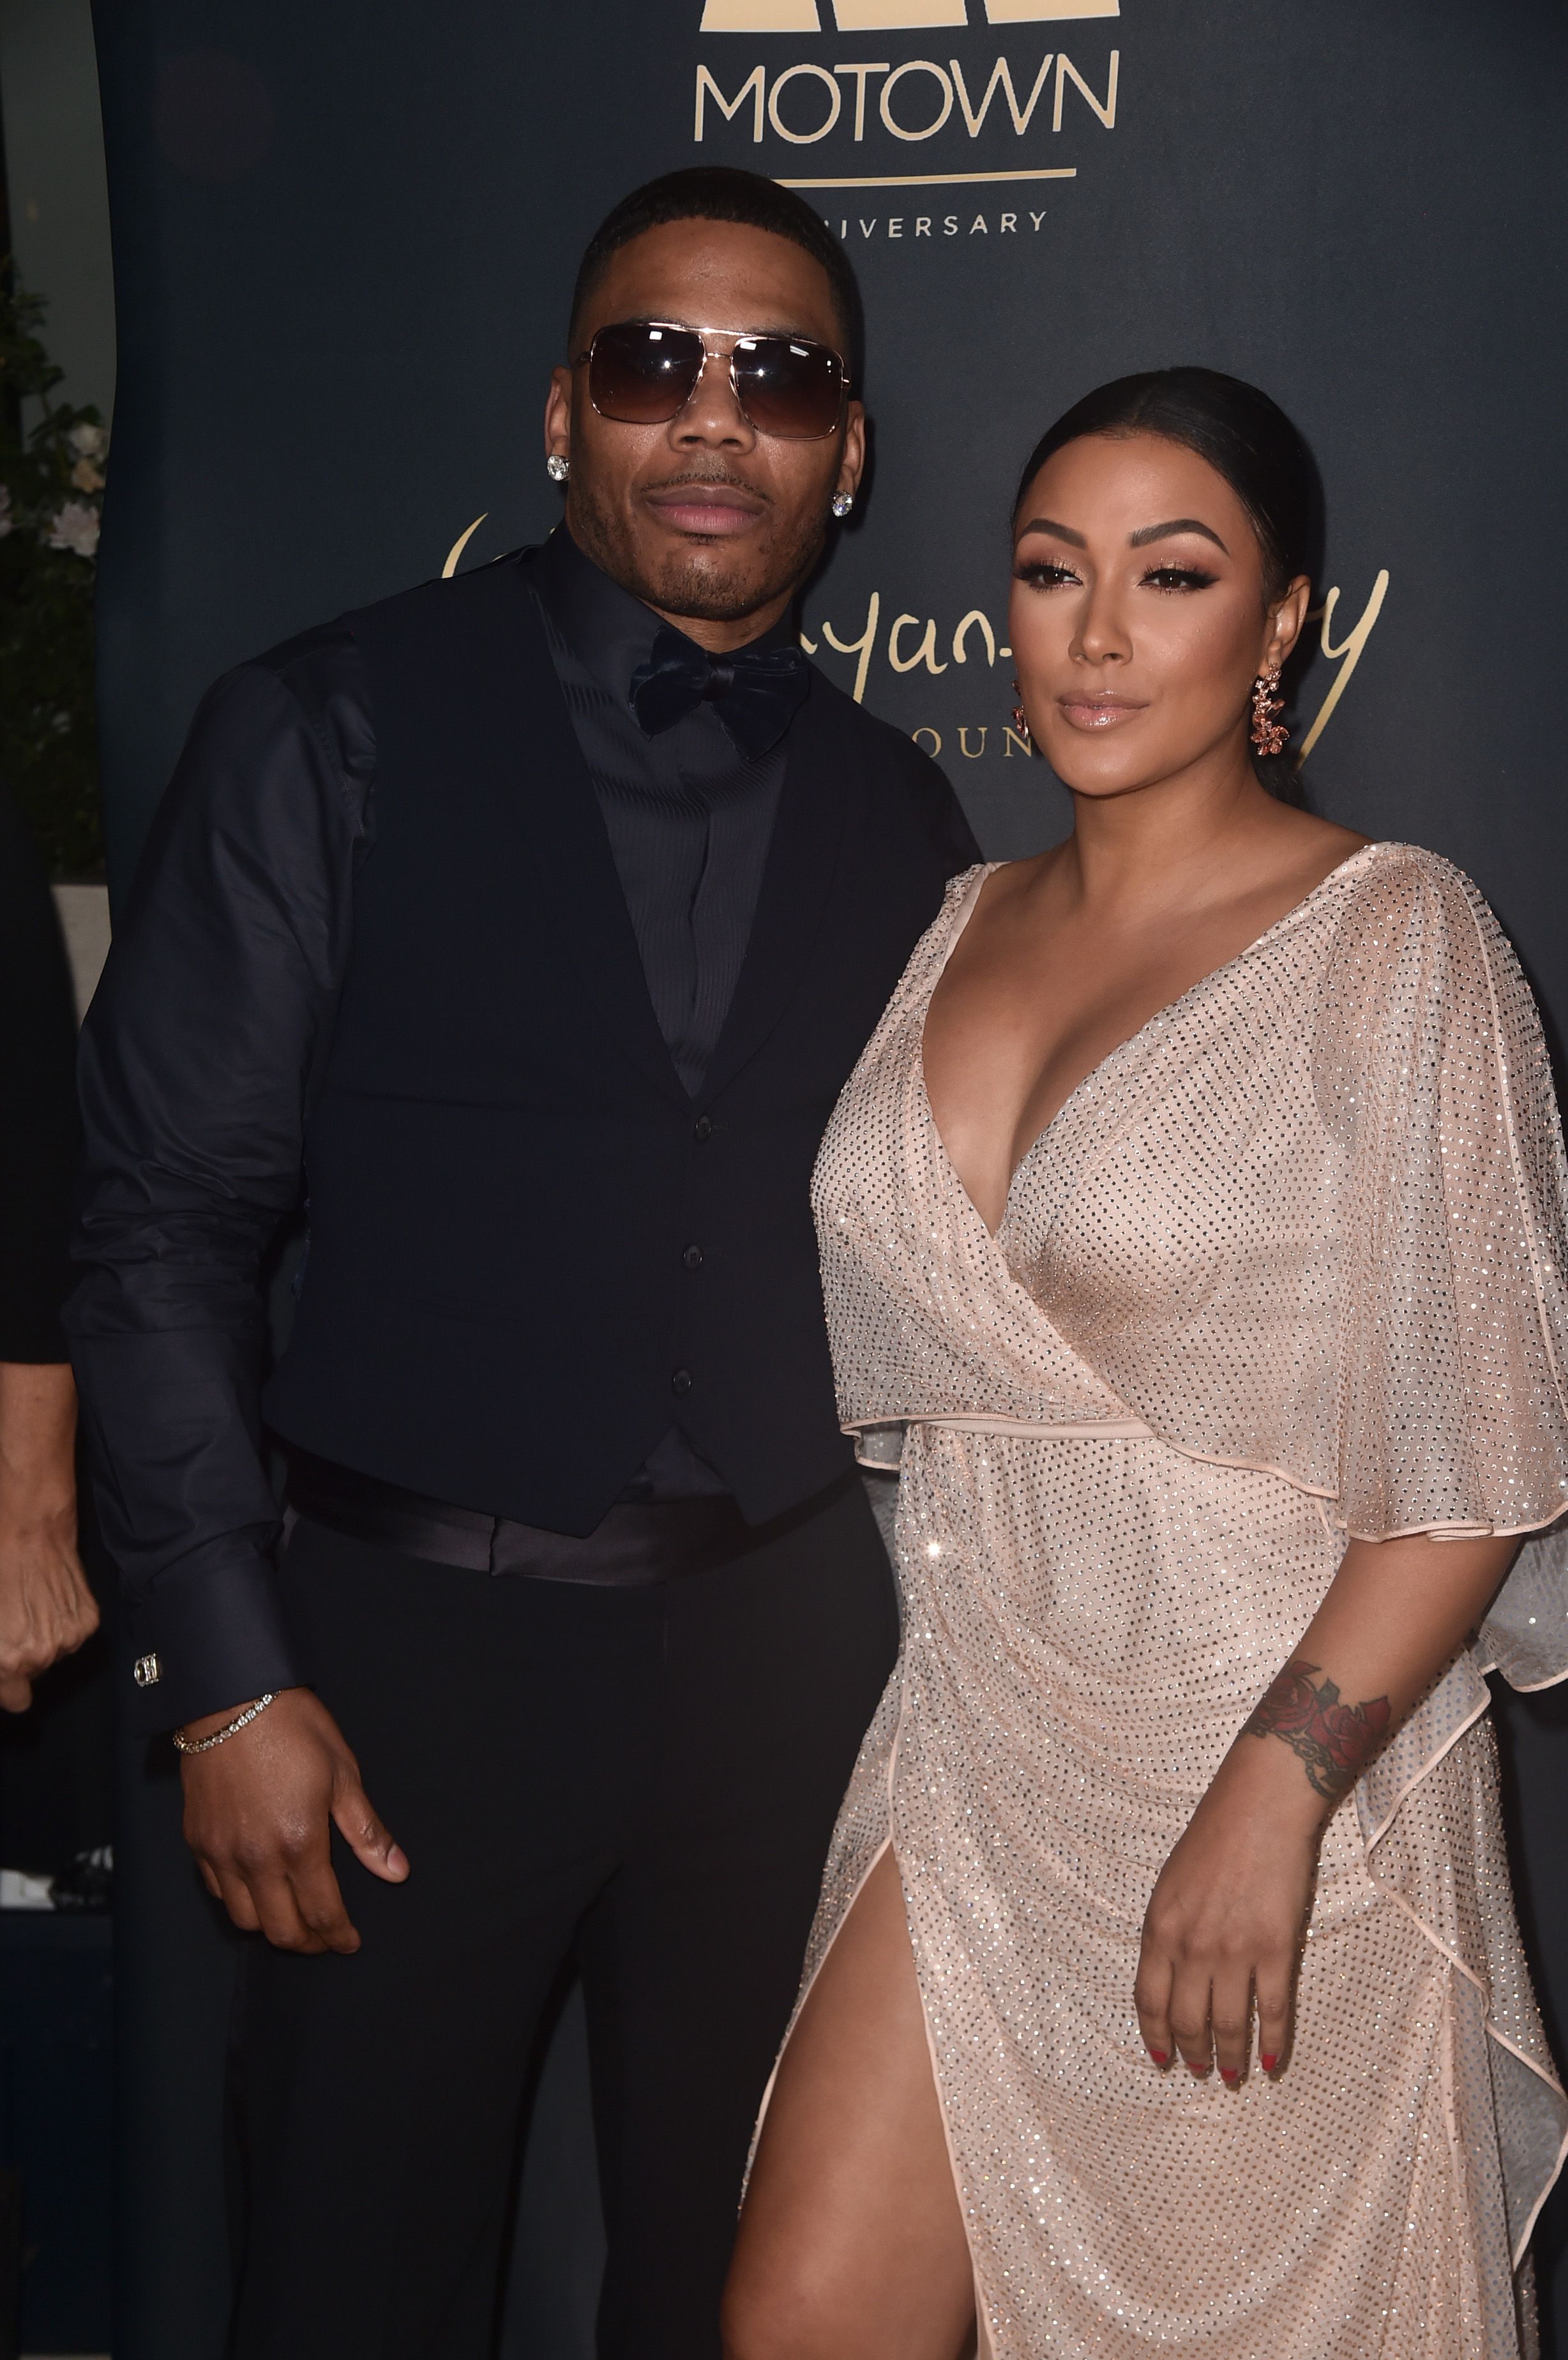 Nelly and Shantel Jackson at the Ryan Gordy Foundation's celebration of 60 Years of Motown at Waldorf Astoria Beverly Hills on November 11, 2019 | Photo: Getty Images